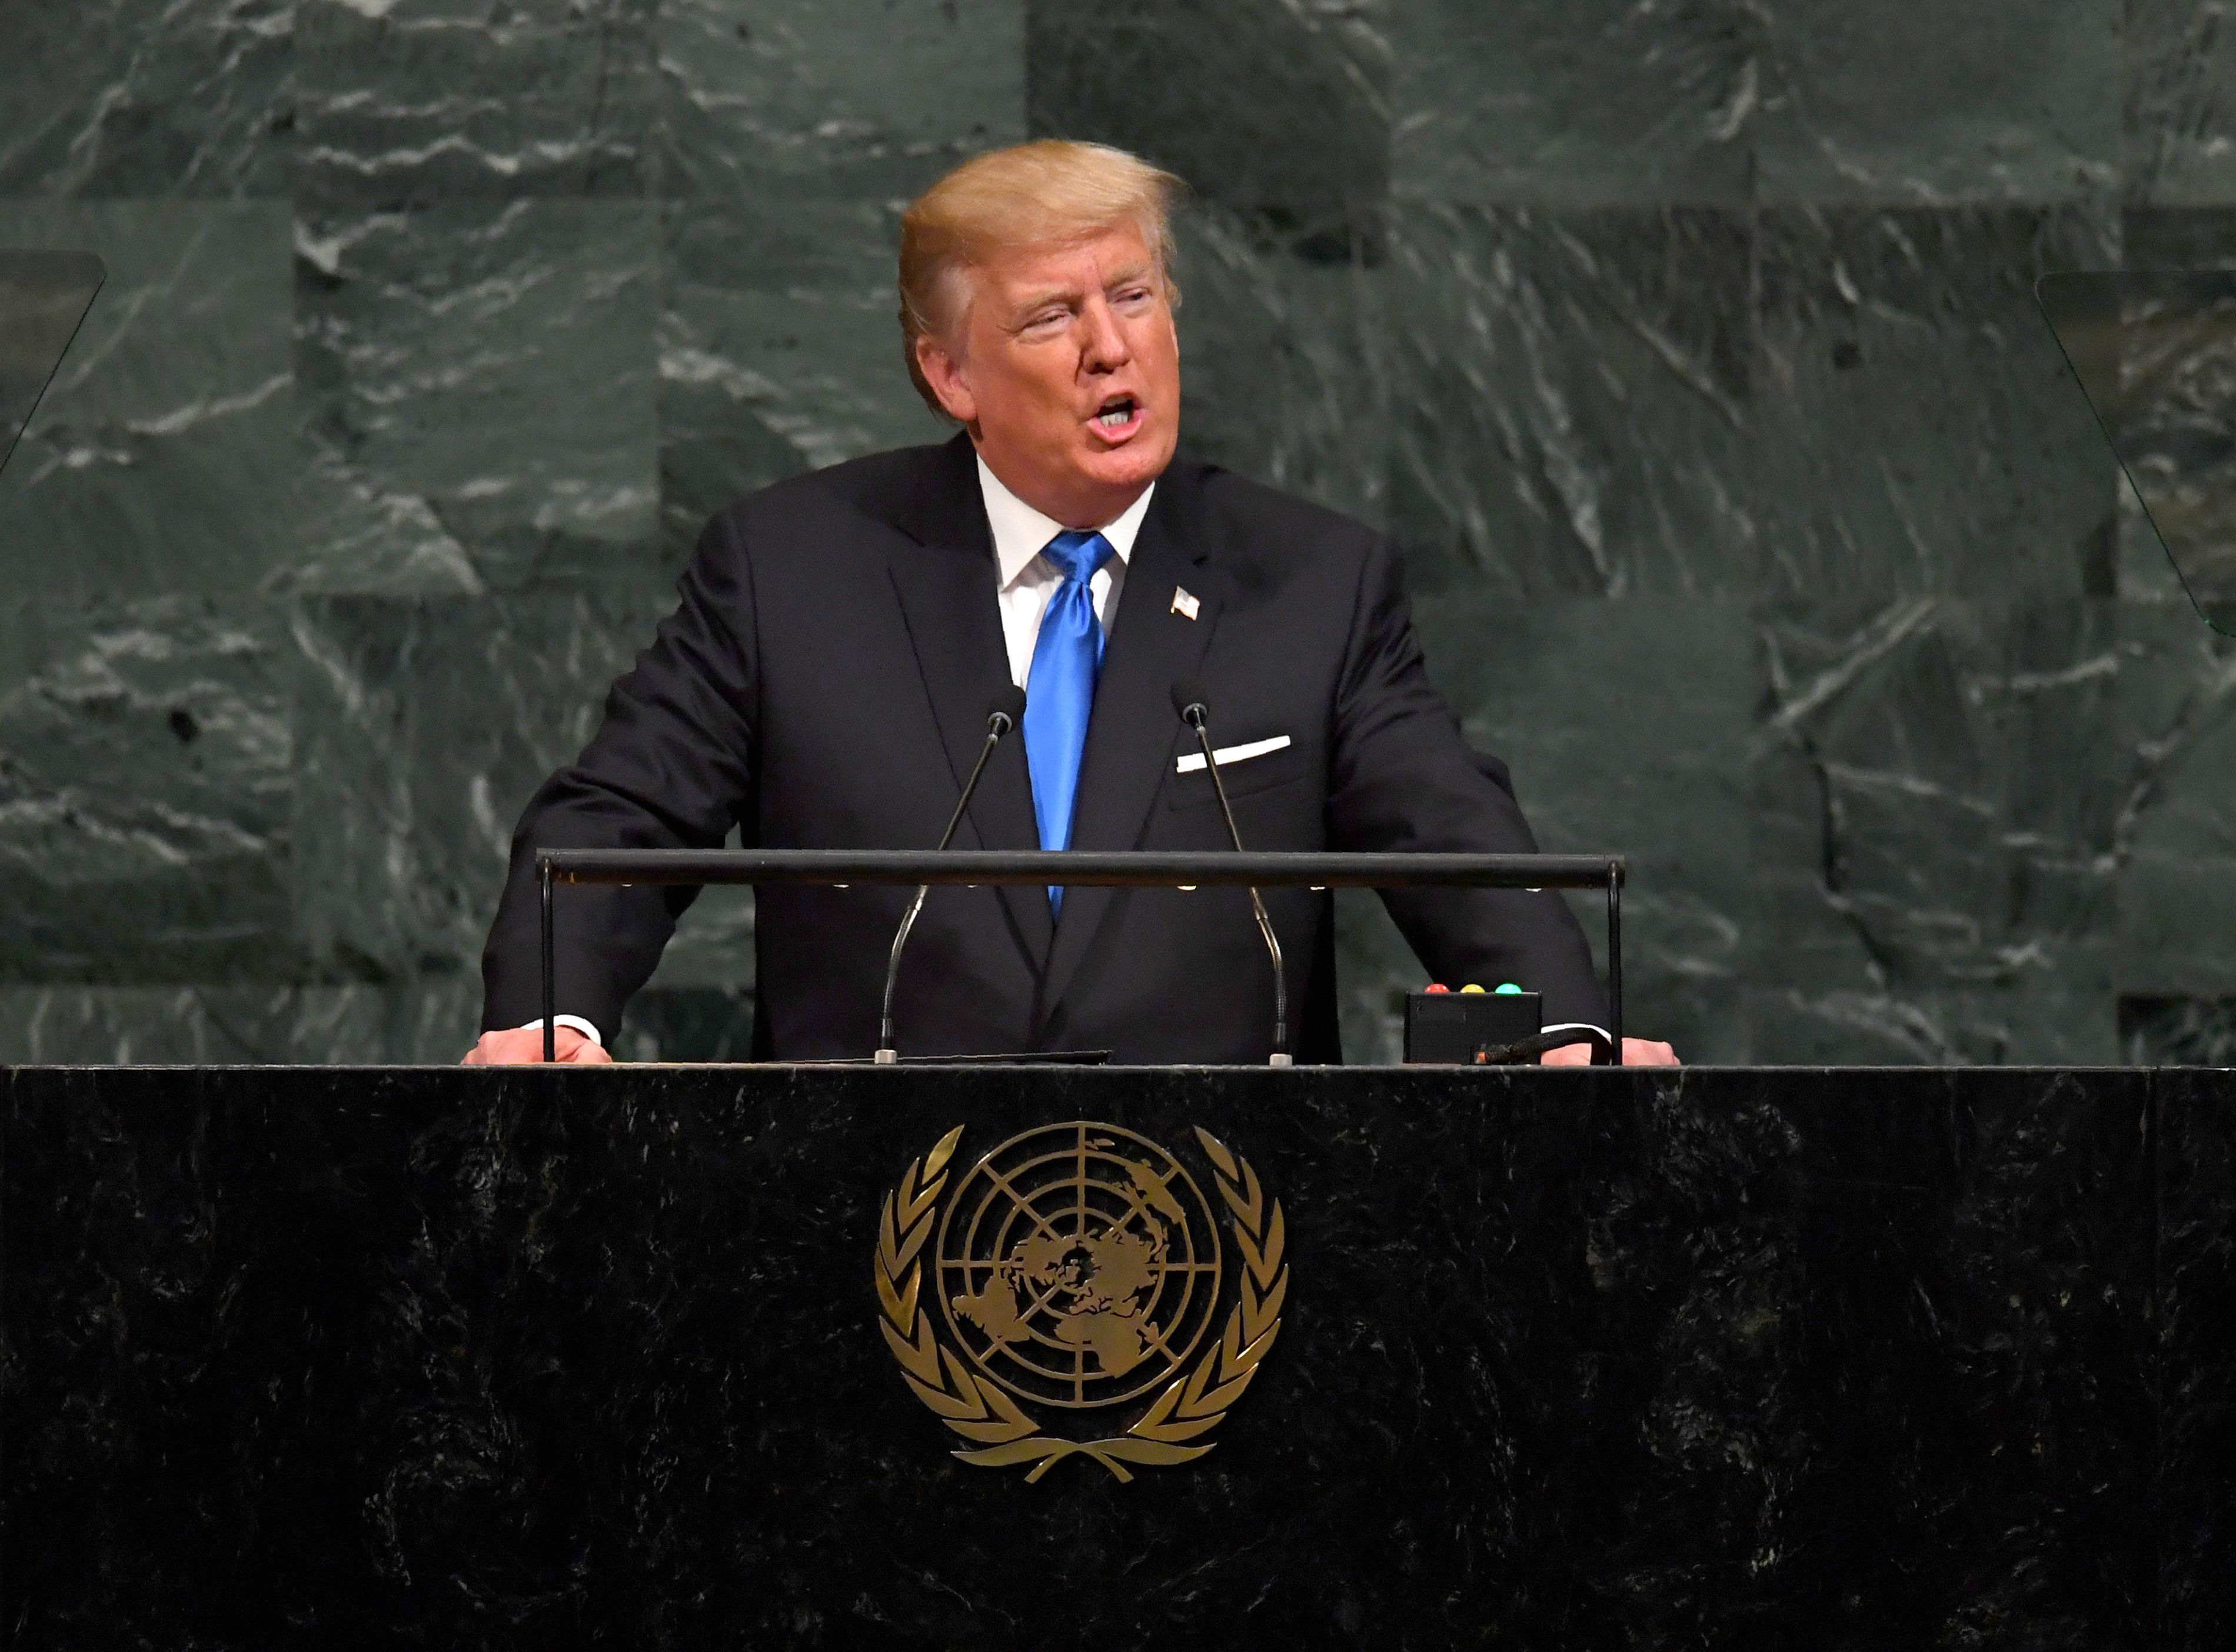 President Donald Trump addresses the 72nd Annual UN General Assembly in New York on Sept. 19, 2017. (TIMOTHY A. CLARY/AFP/Getty Images)